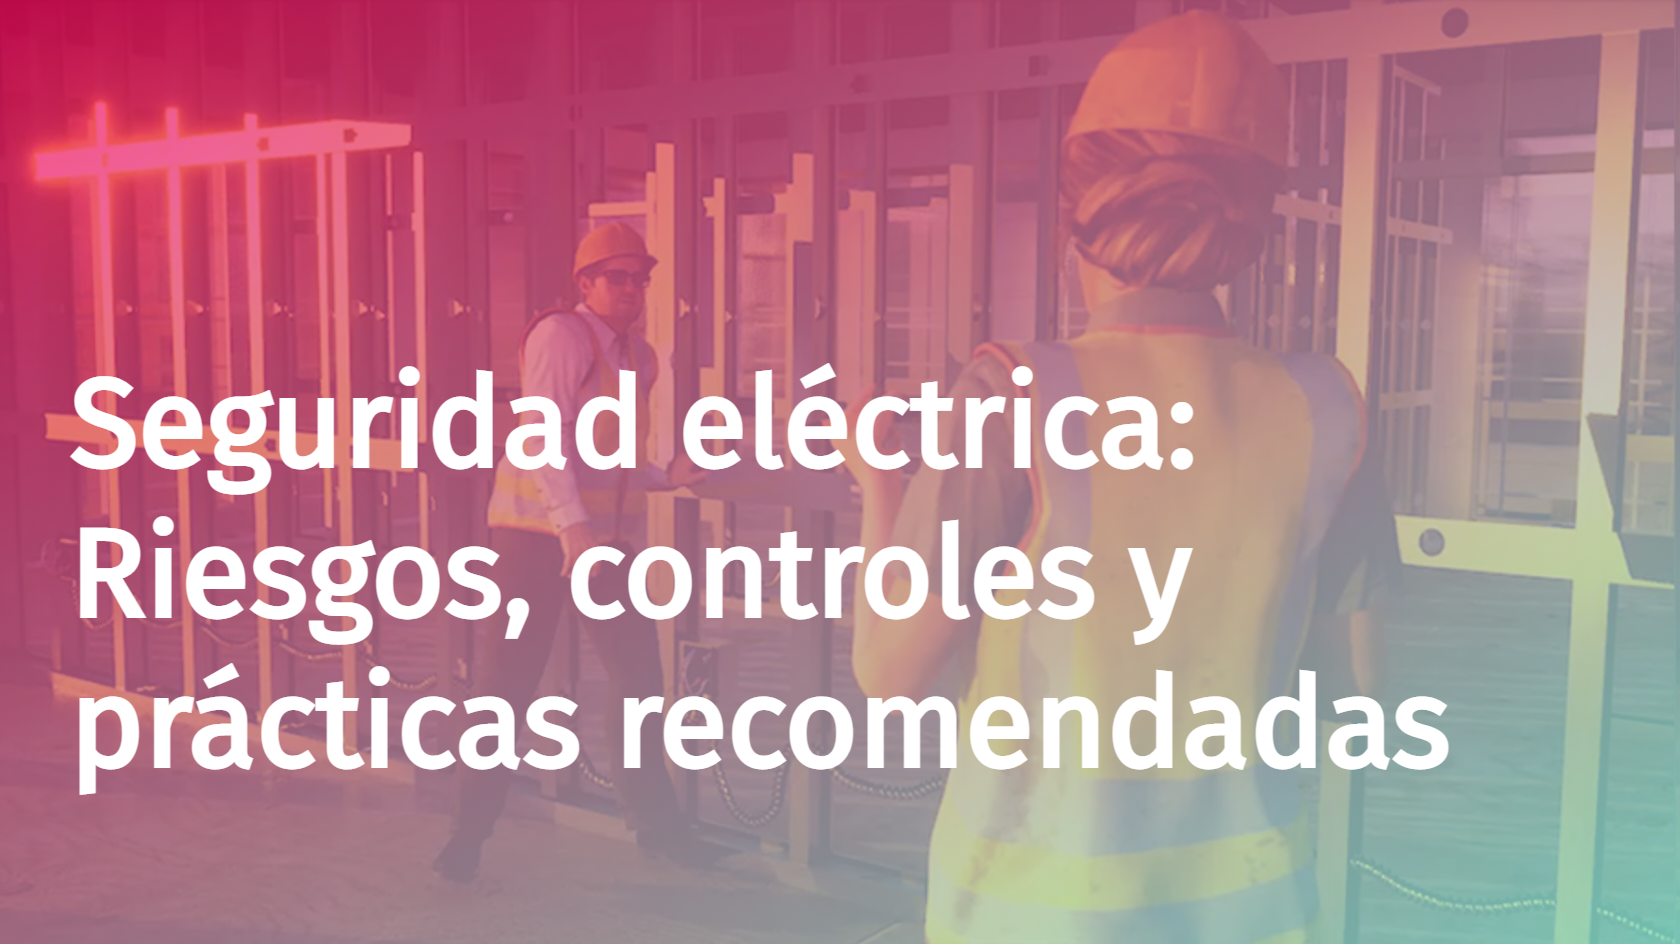 Spanish - Electrical Safety: Hazards, Controls, and Best Practices